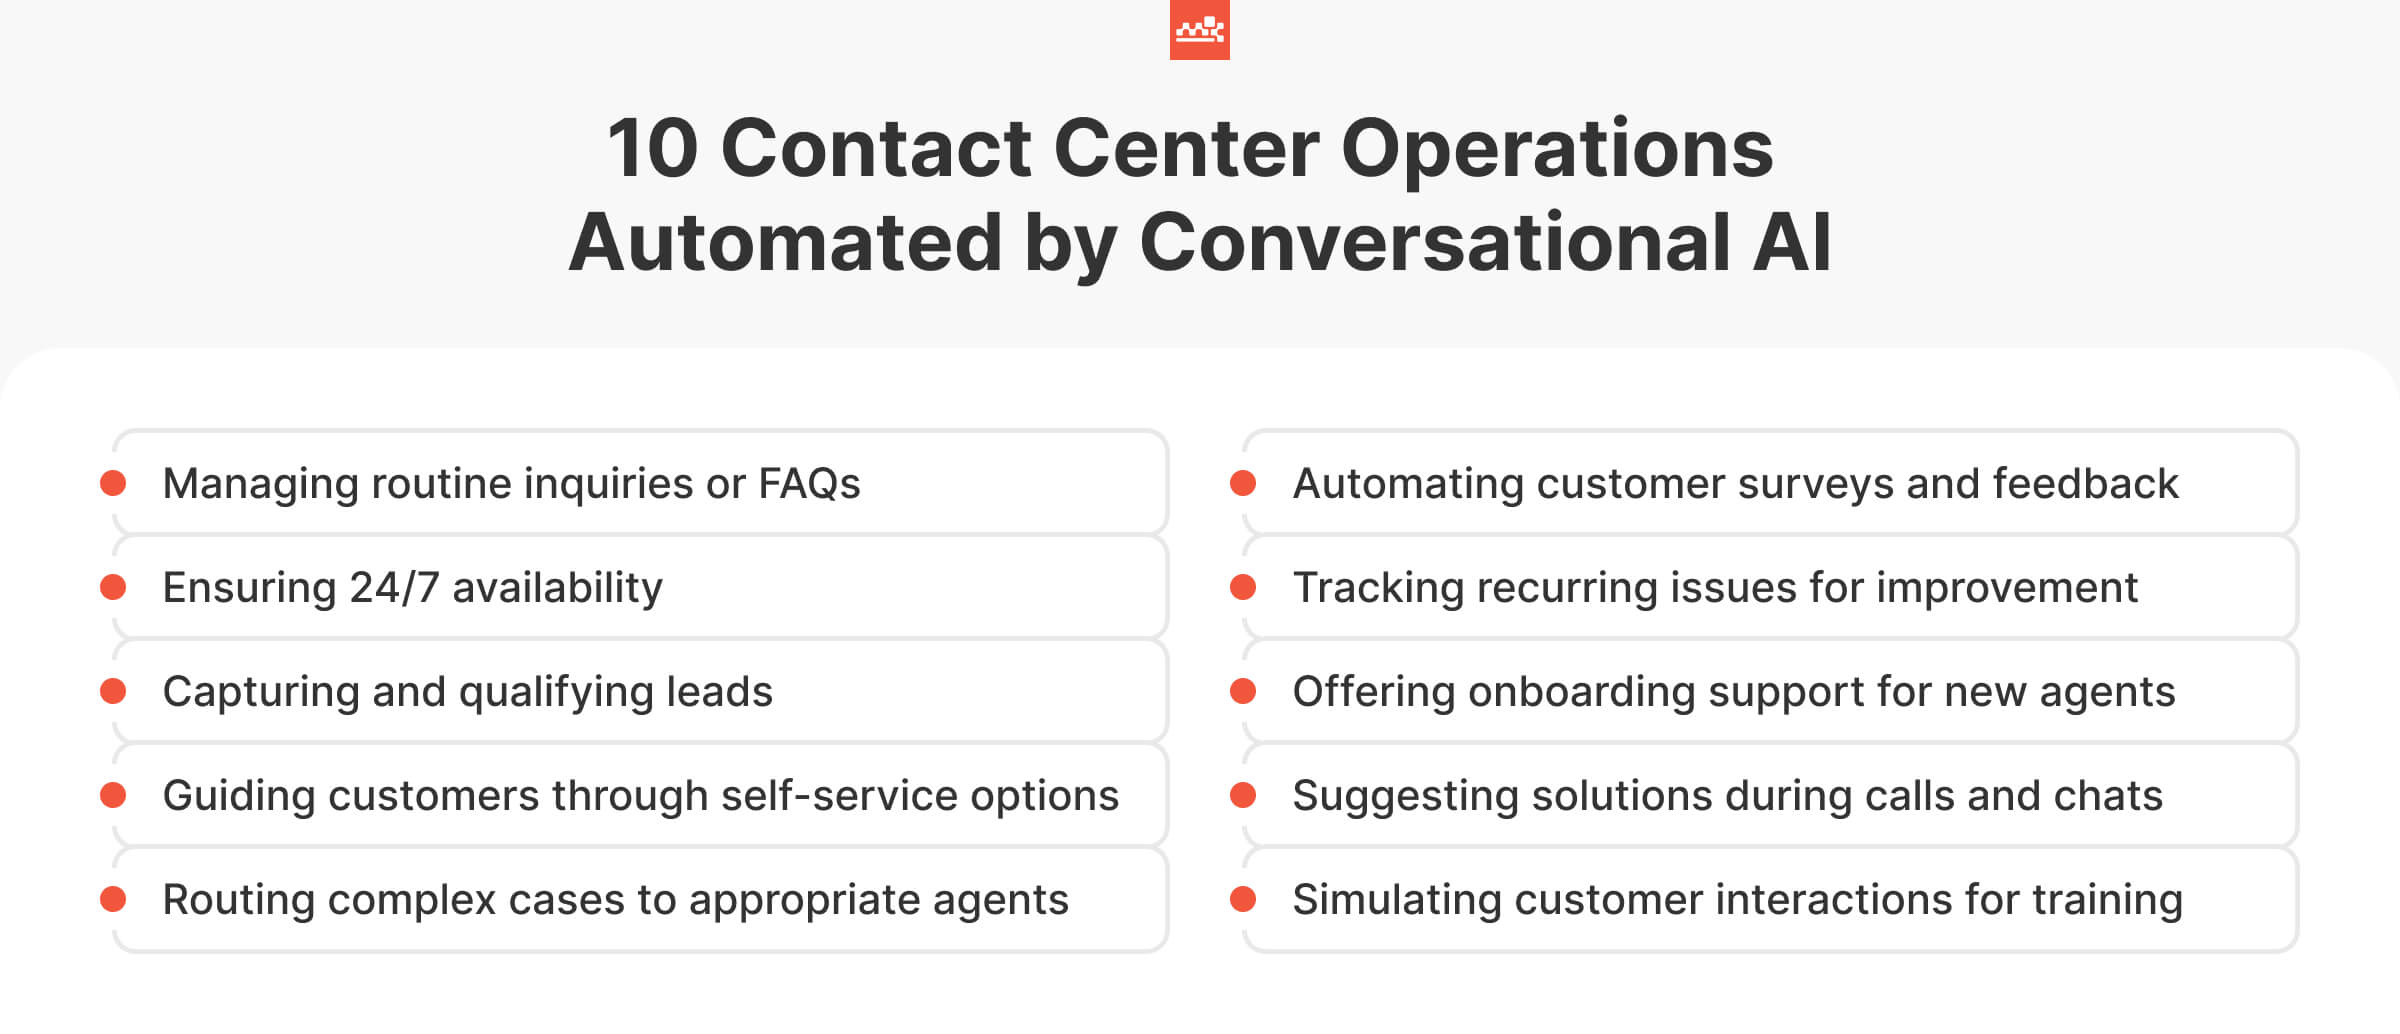 10 Contact Center Operations Automated by Conversational AI